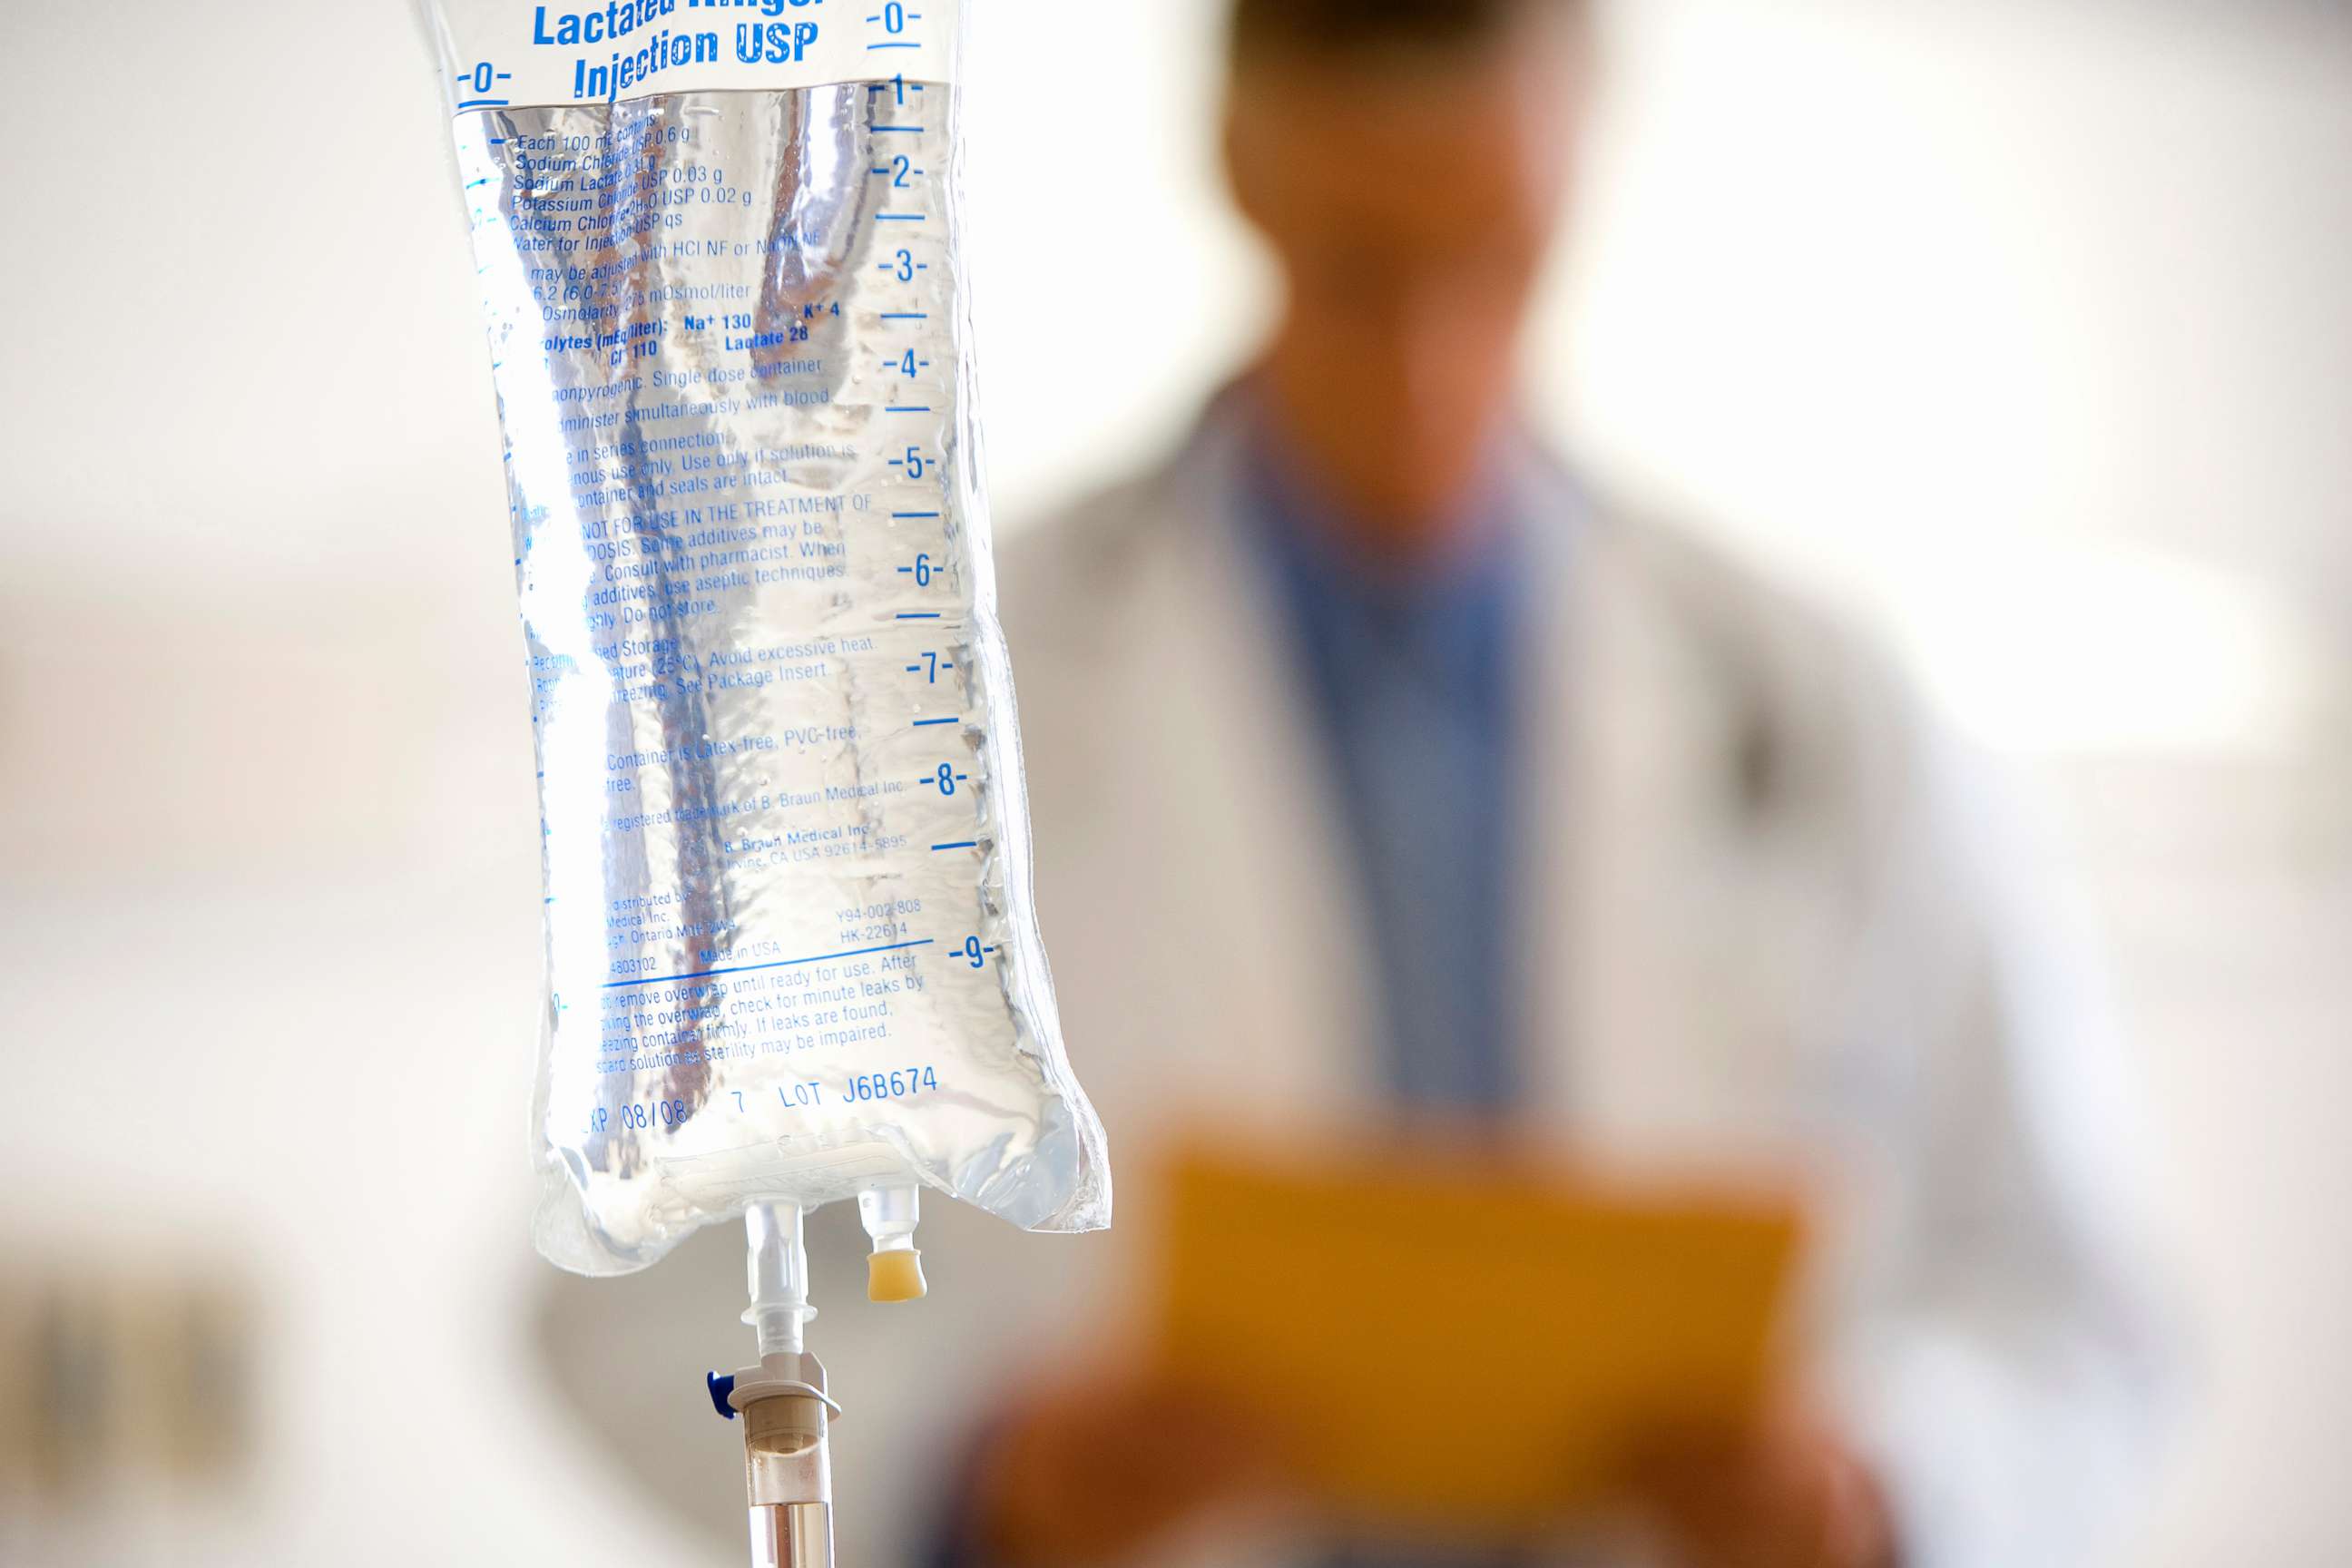 PHOTO: An intravenous bag is pictured in this undated stock photo.